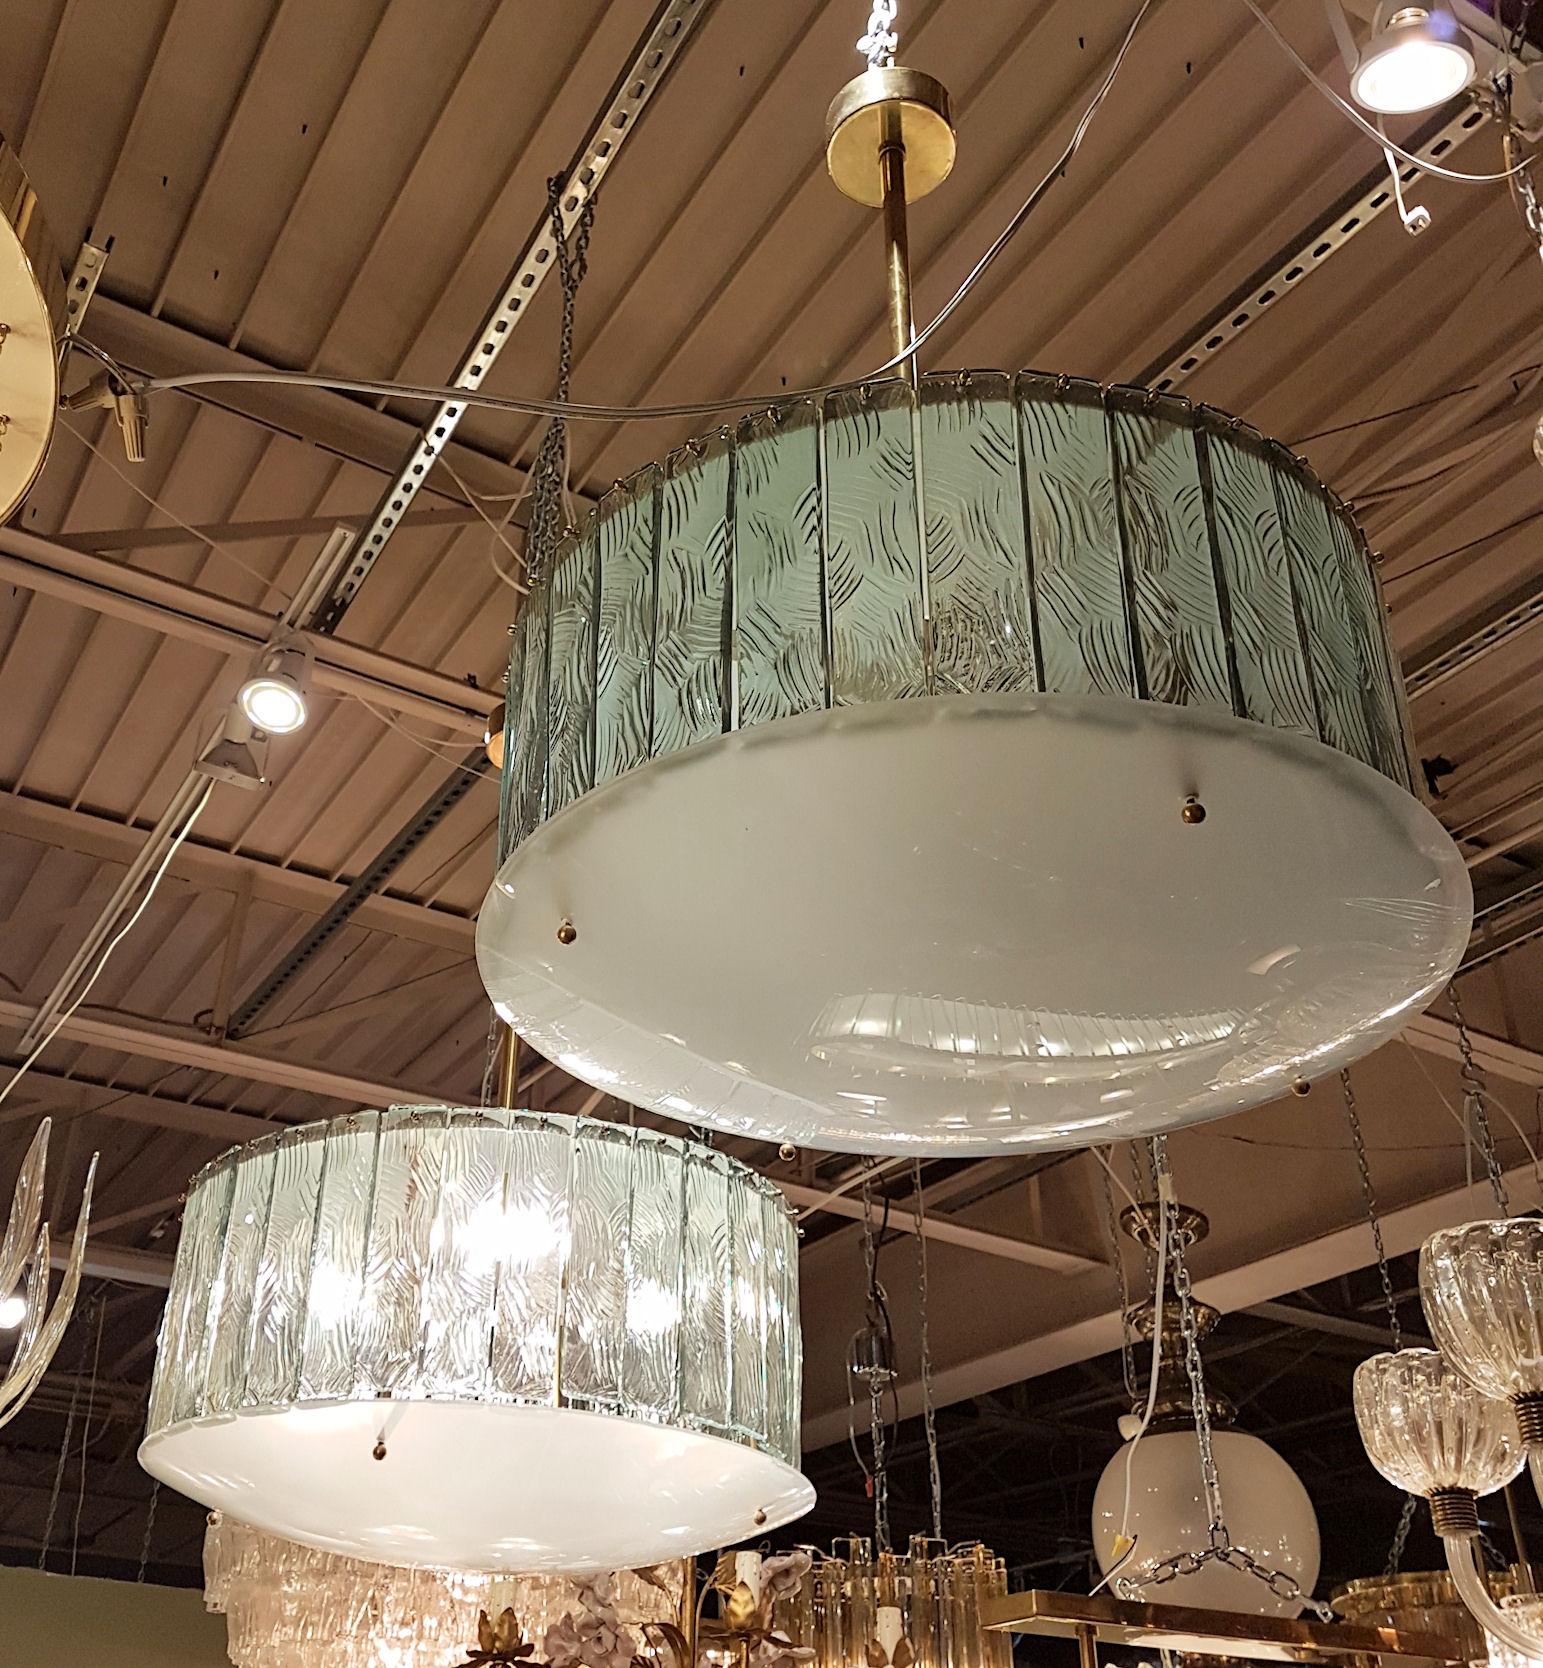 Pair of Mid-Century Modern light green/translucent glass and brass chandeliers, in the style of Gio Ponti, by Fontana Arte, Italy. 
The vintage drum chandeliers have 4 candelabra base lights each and are rewired for the US.
The light green glasses